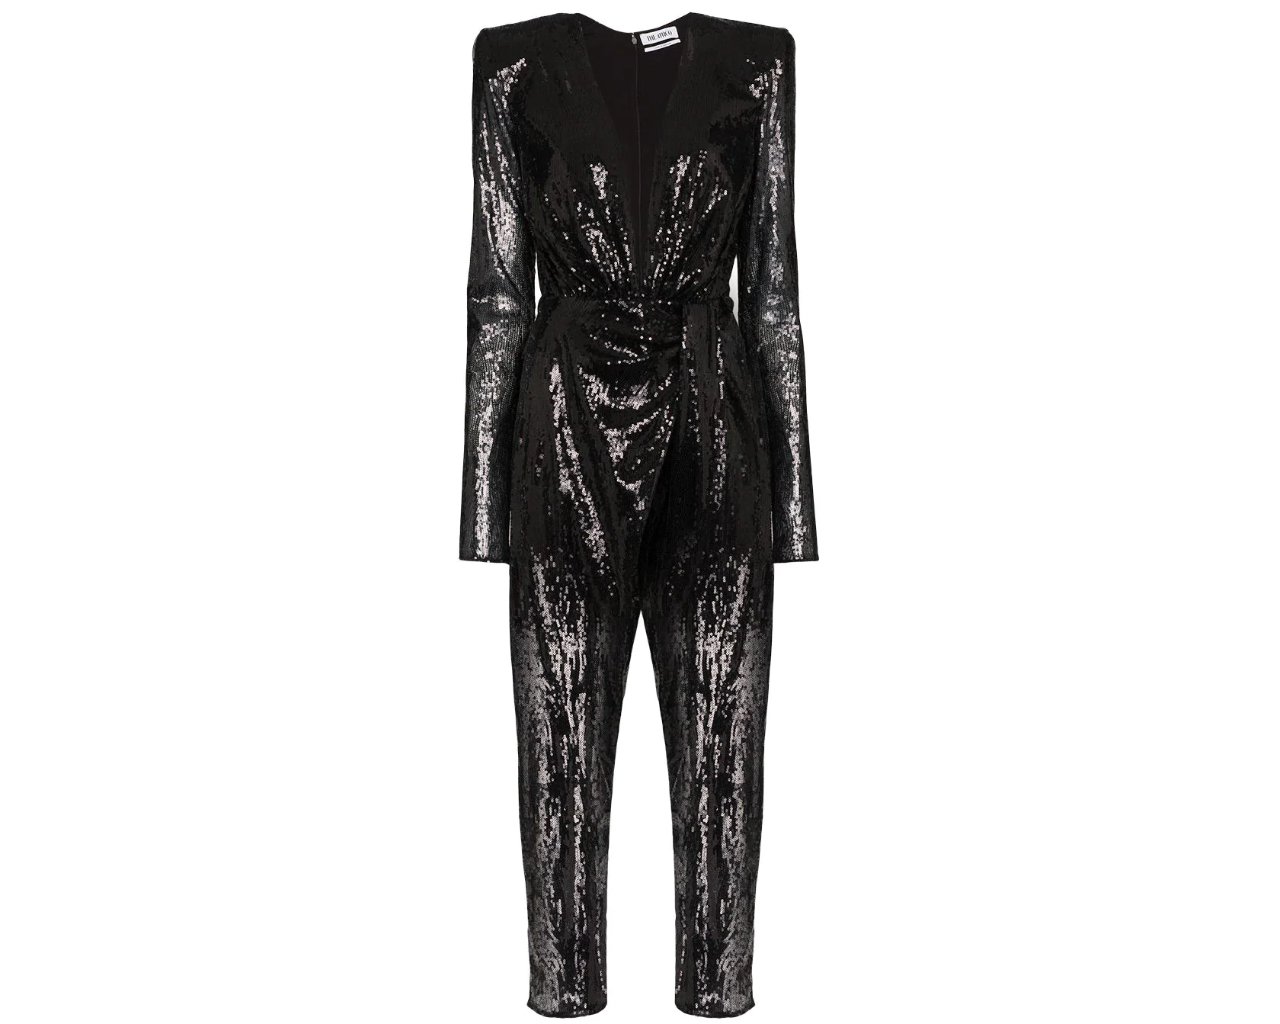 The Attico sequin-embellished jumpsuit